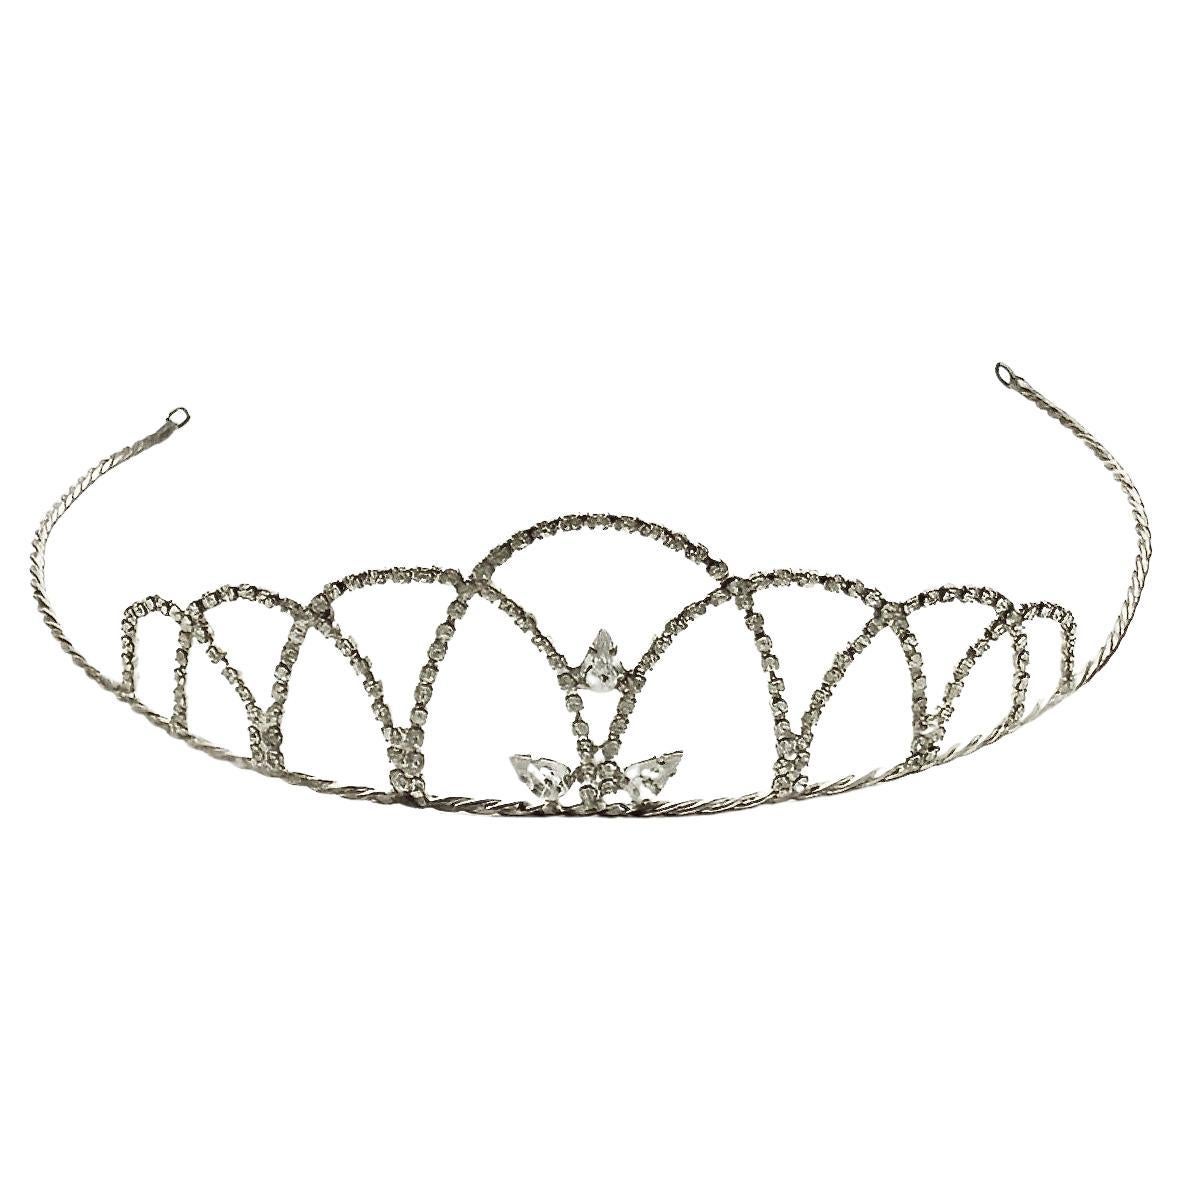 Silver Plated Tiara with a Rope Twist Band and Faceted Rhinestones circa 1960s For Sale